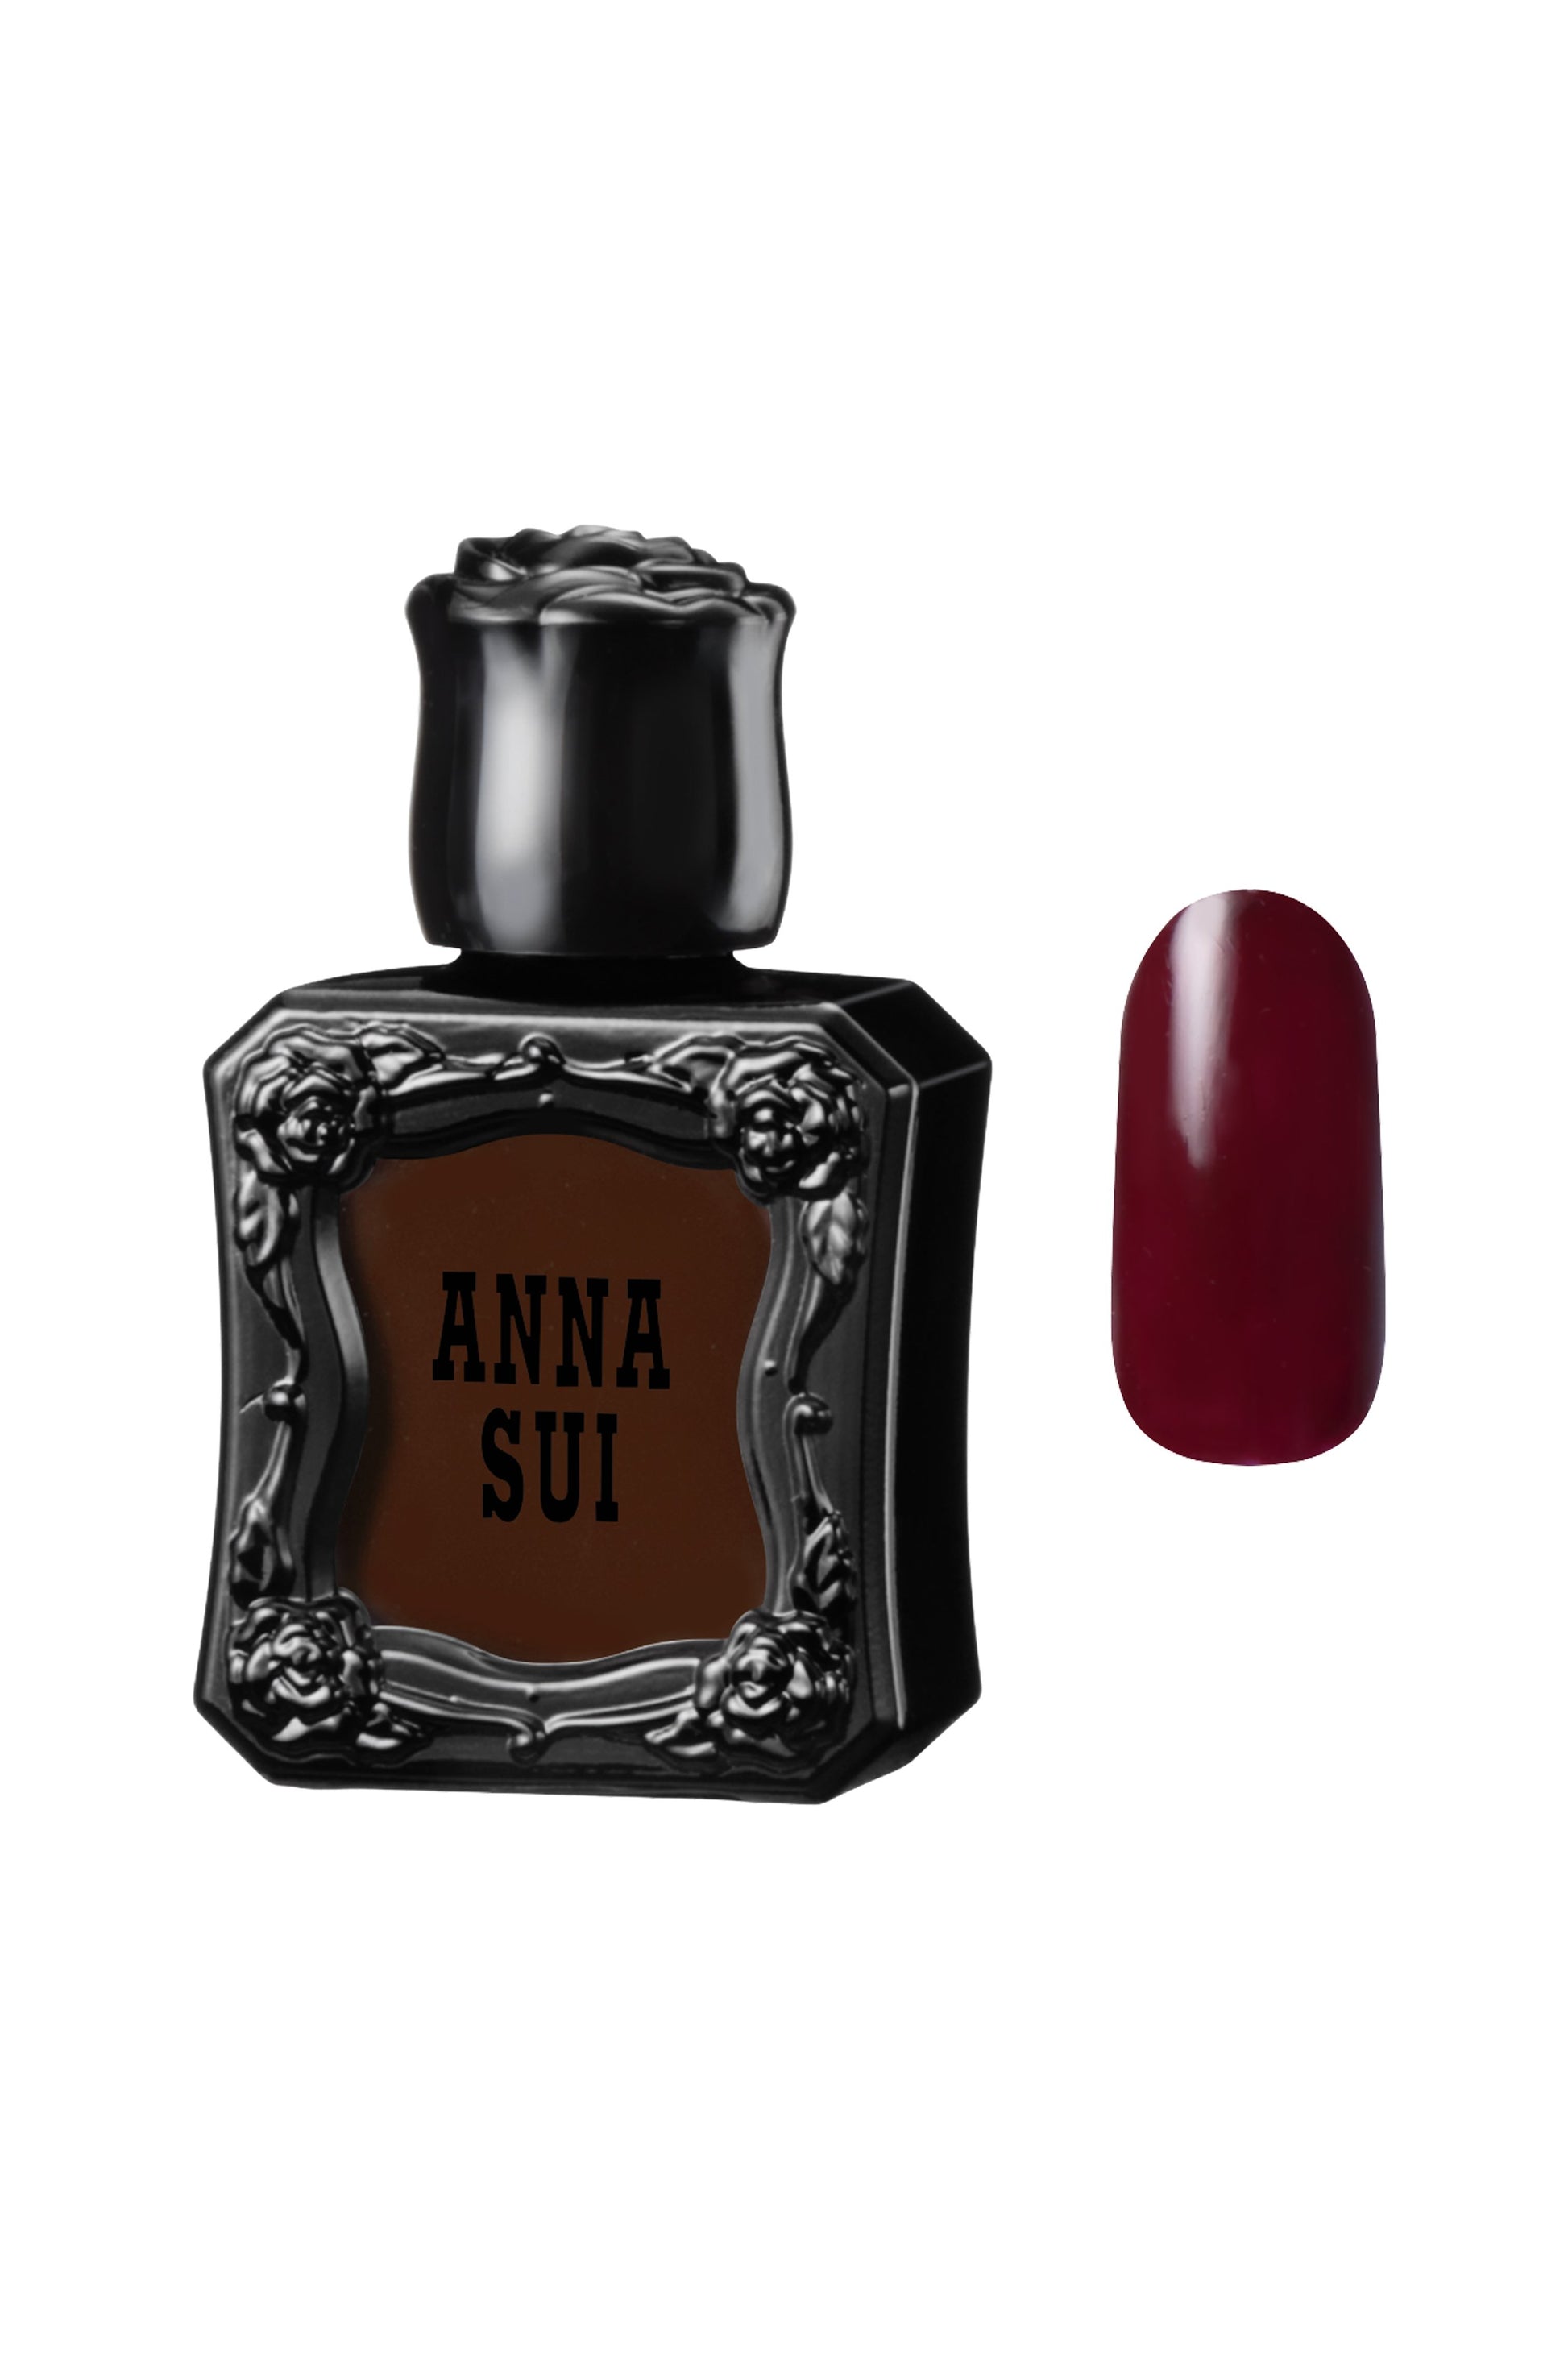 DARK CHERRY Nail Polish bottle raised rose pattern, Anna Sui in black over nail colors in bottle front